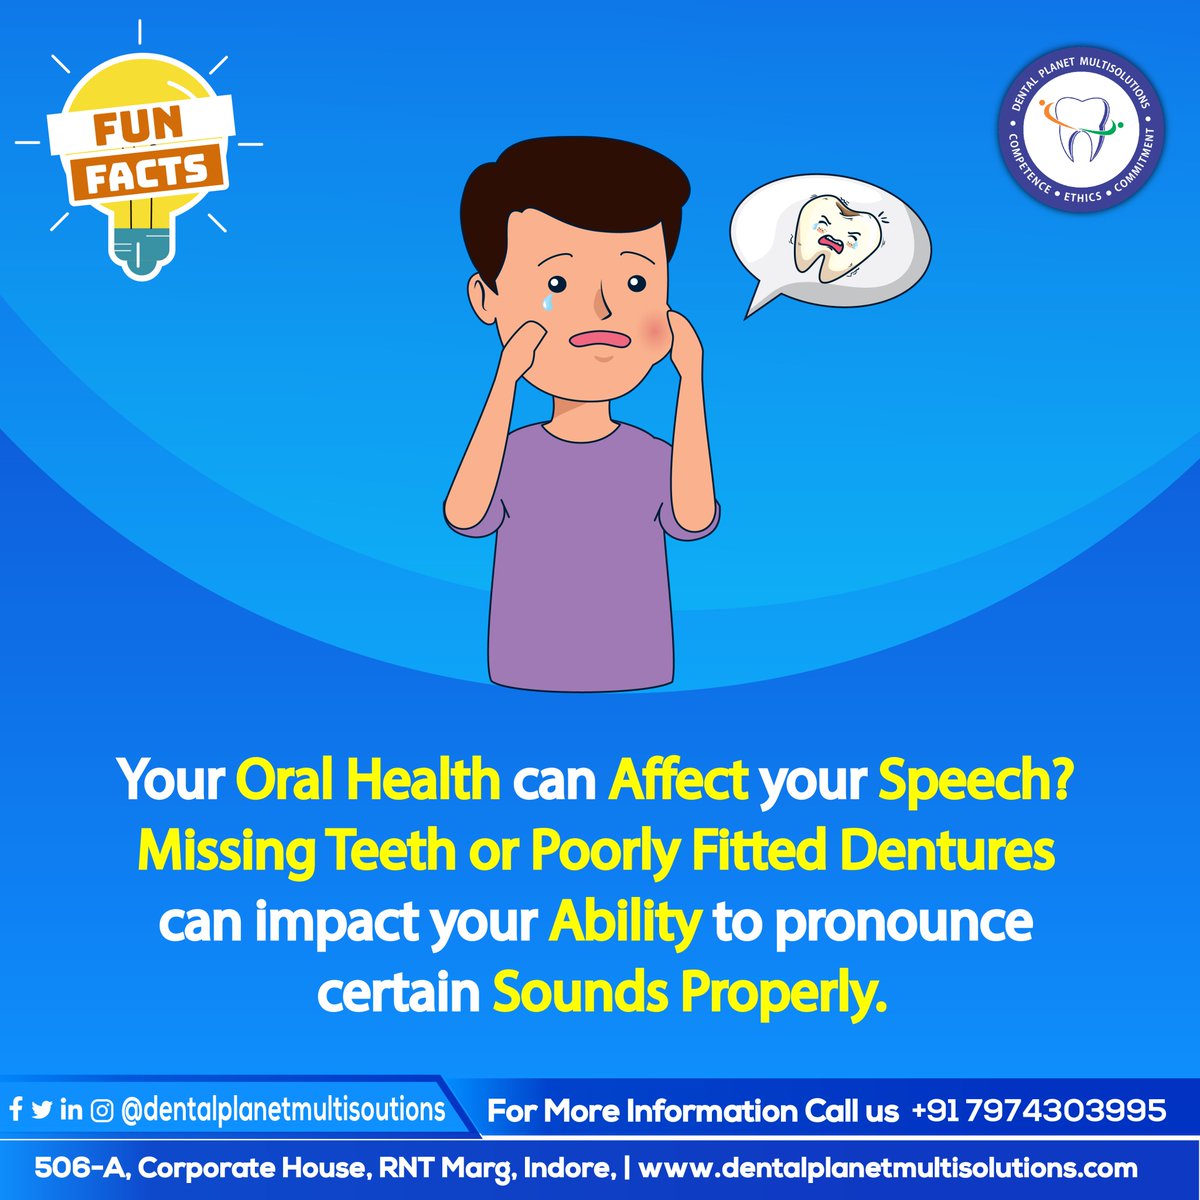 Your oral health can have a direct impact on your speech. Missing teeth or poorly fitted dentures can affect your ability to pronounce certain sounds properly. Take care of your oral health for clear and confident speech! 😁

#OralHealthMatters #speechimpairment  #ipriyankbanthia